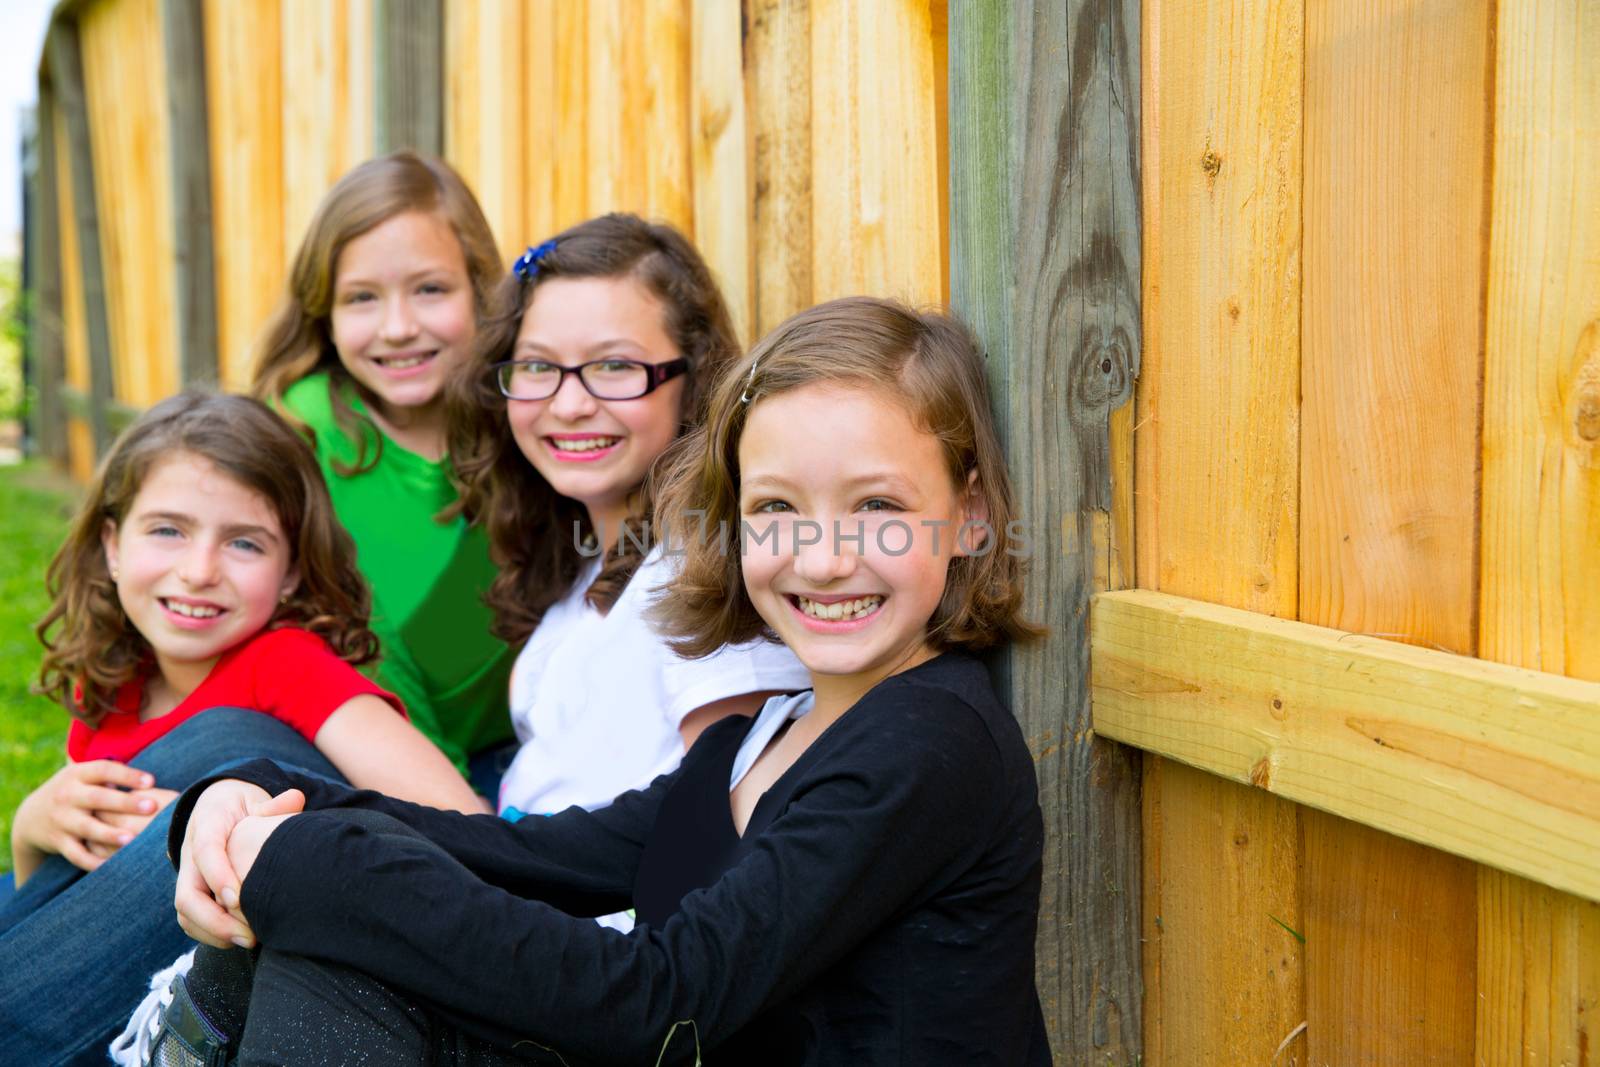 Grils group in a row smiling in a wooden fence outdoor